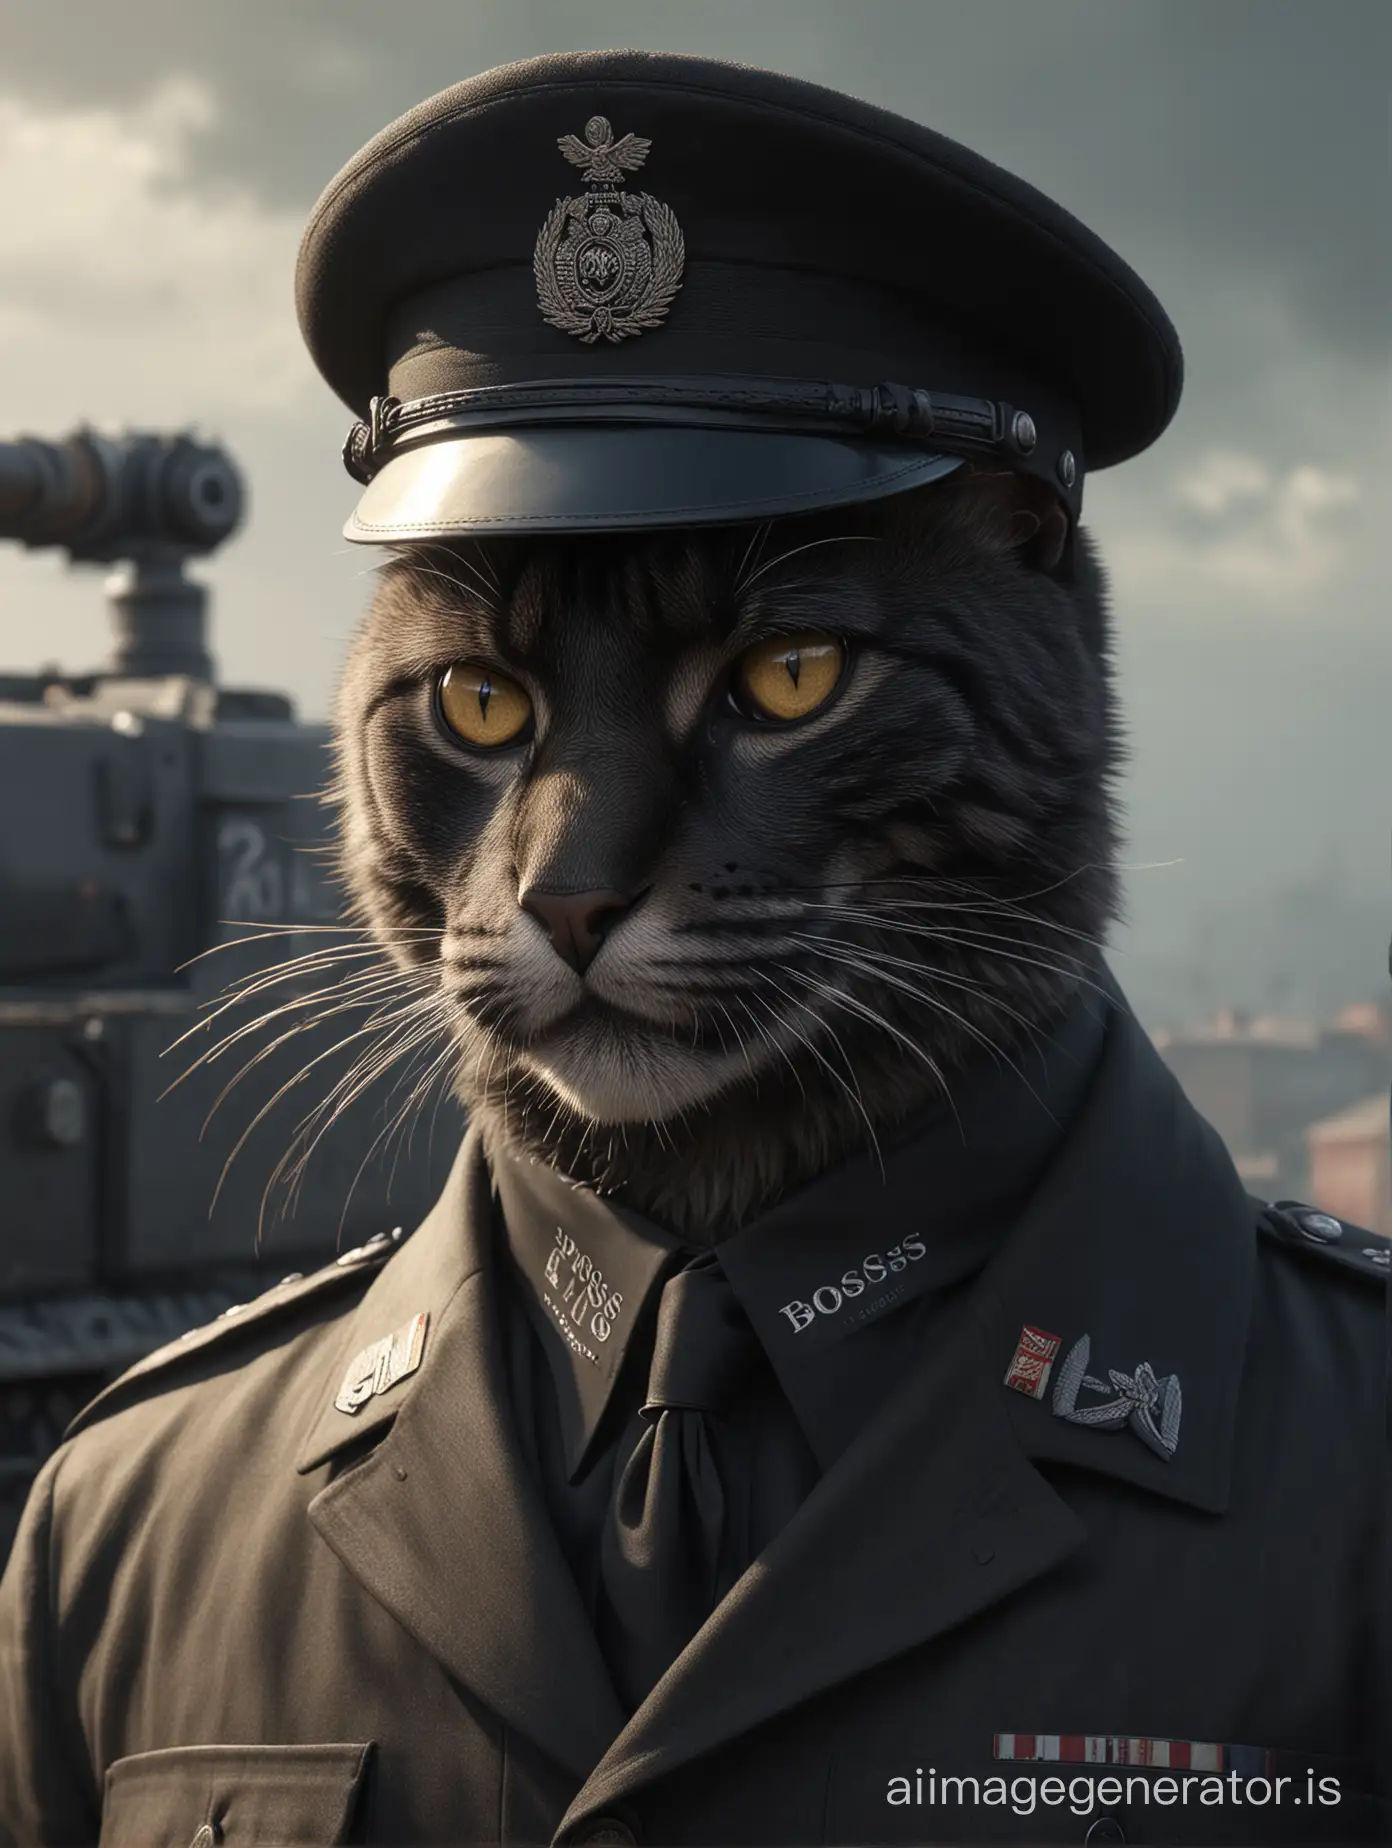 4k, ultra resolution, realistic. Hugo boss German officer black cat 1940's style with near tank tiger